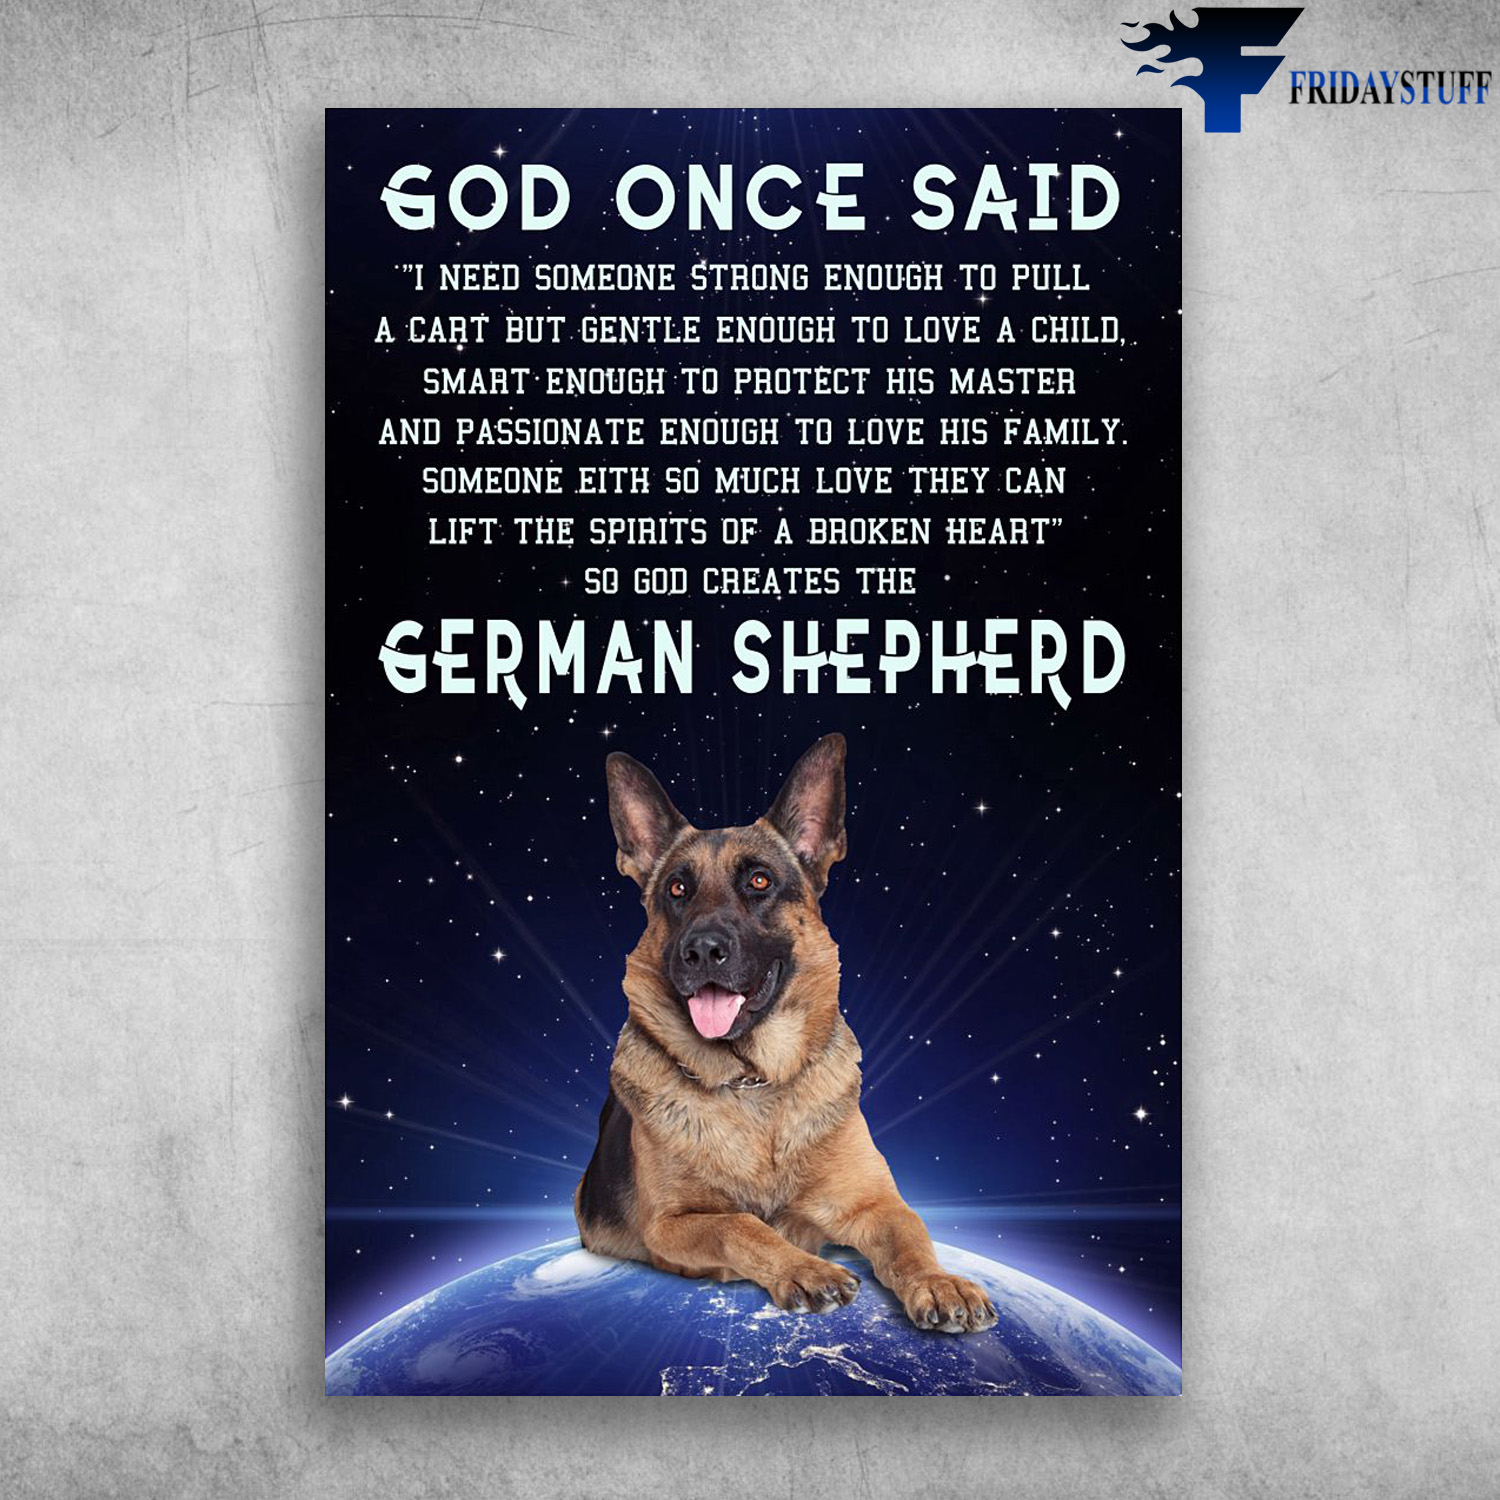 German Shepherd Dog - God Once Said, I Need Someone Strong Enough To Full A Cart But Gentle Enough To Love A Child, Smart Enough To Protect His Master And Passionate Enough To Love His Family